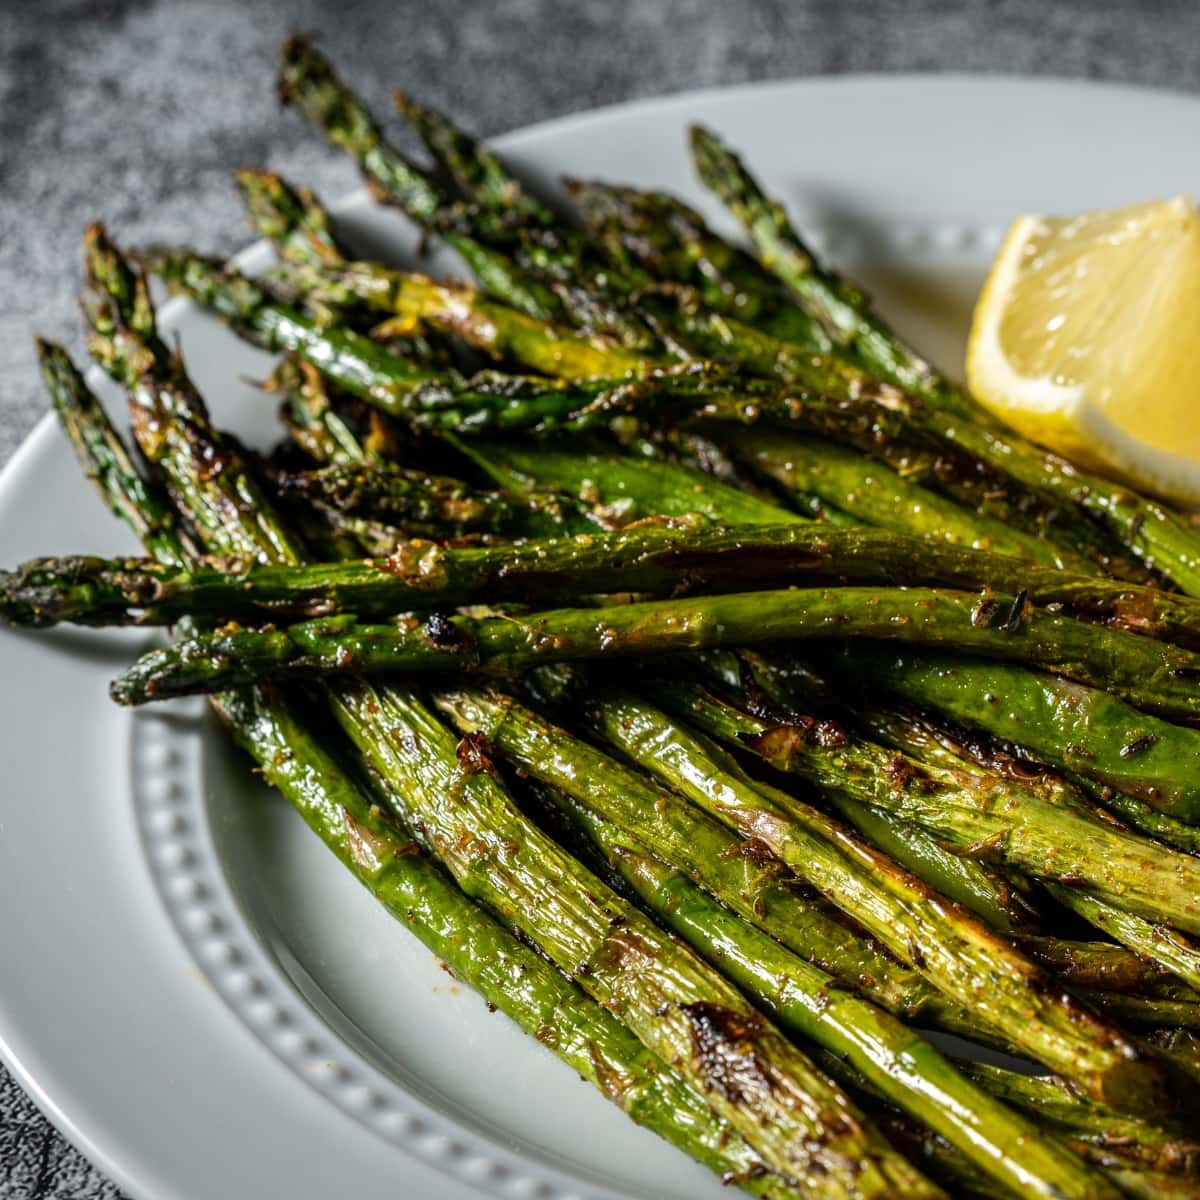 Roasted Asparagus With Sliced Lemon in Plate